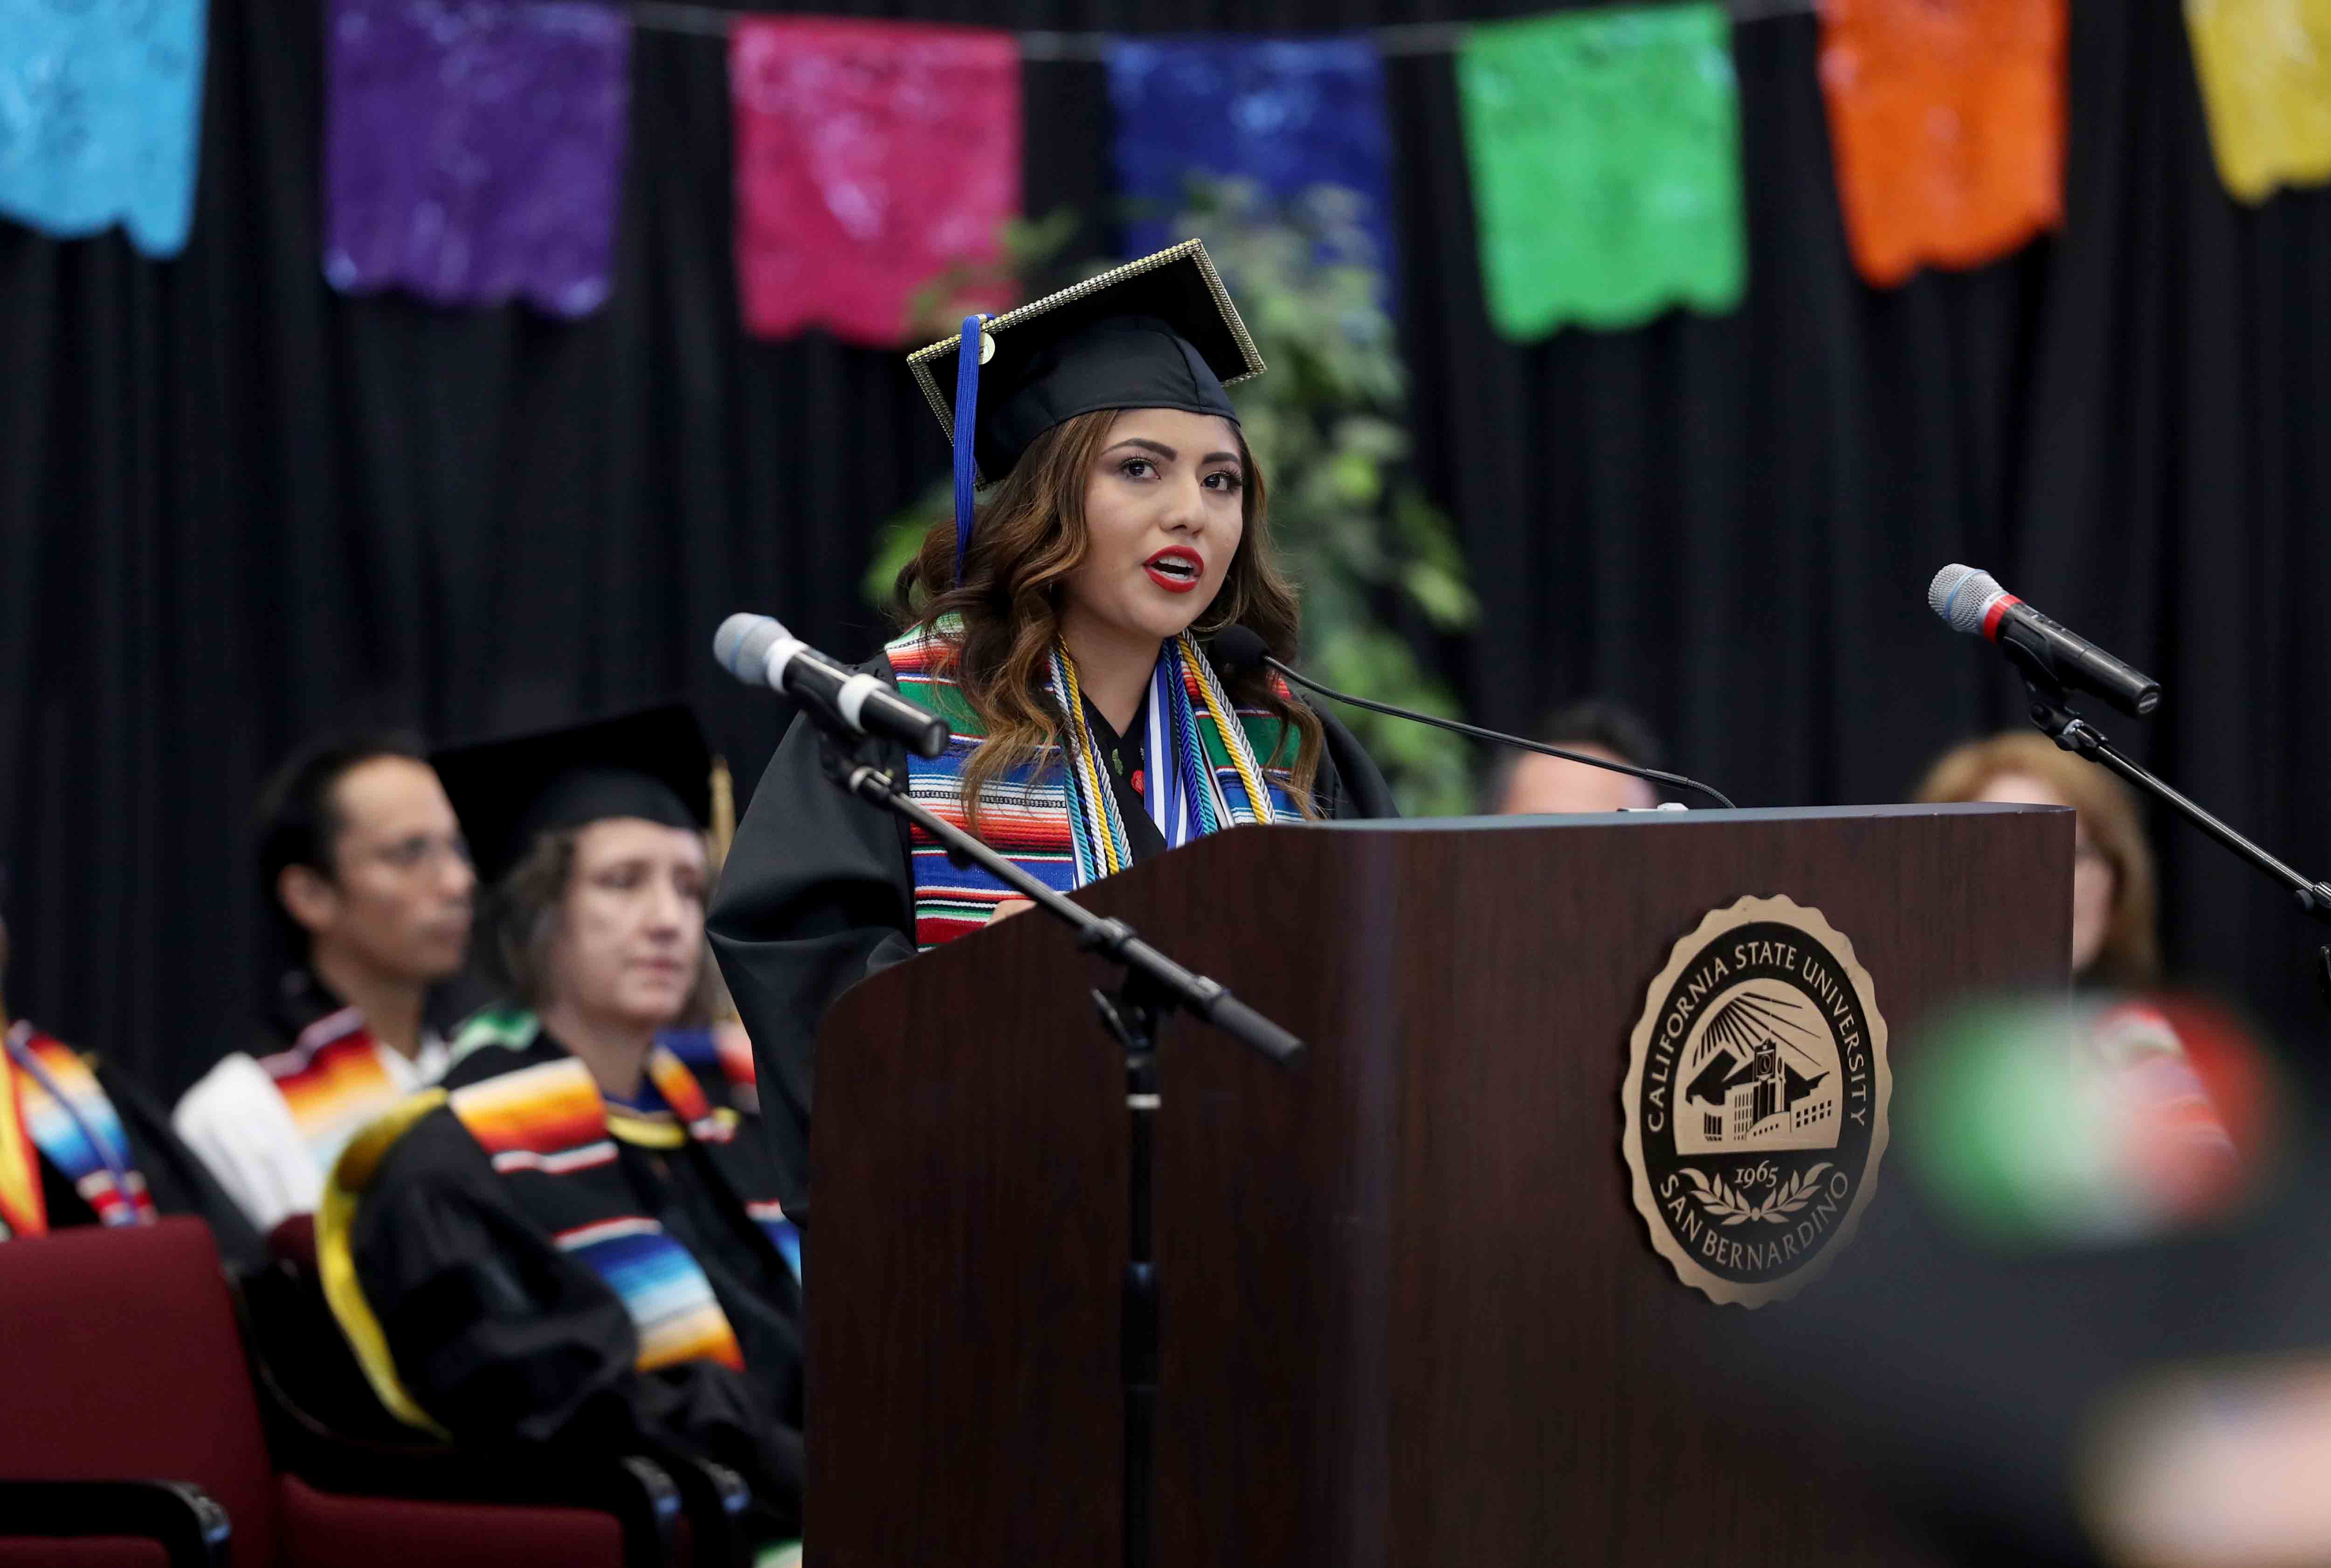 Leticia Herrera Mendez, who will be graduating with a bachelor’s degree in sociology.